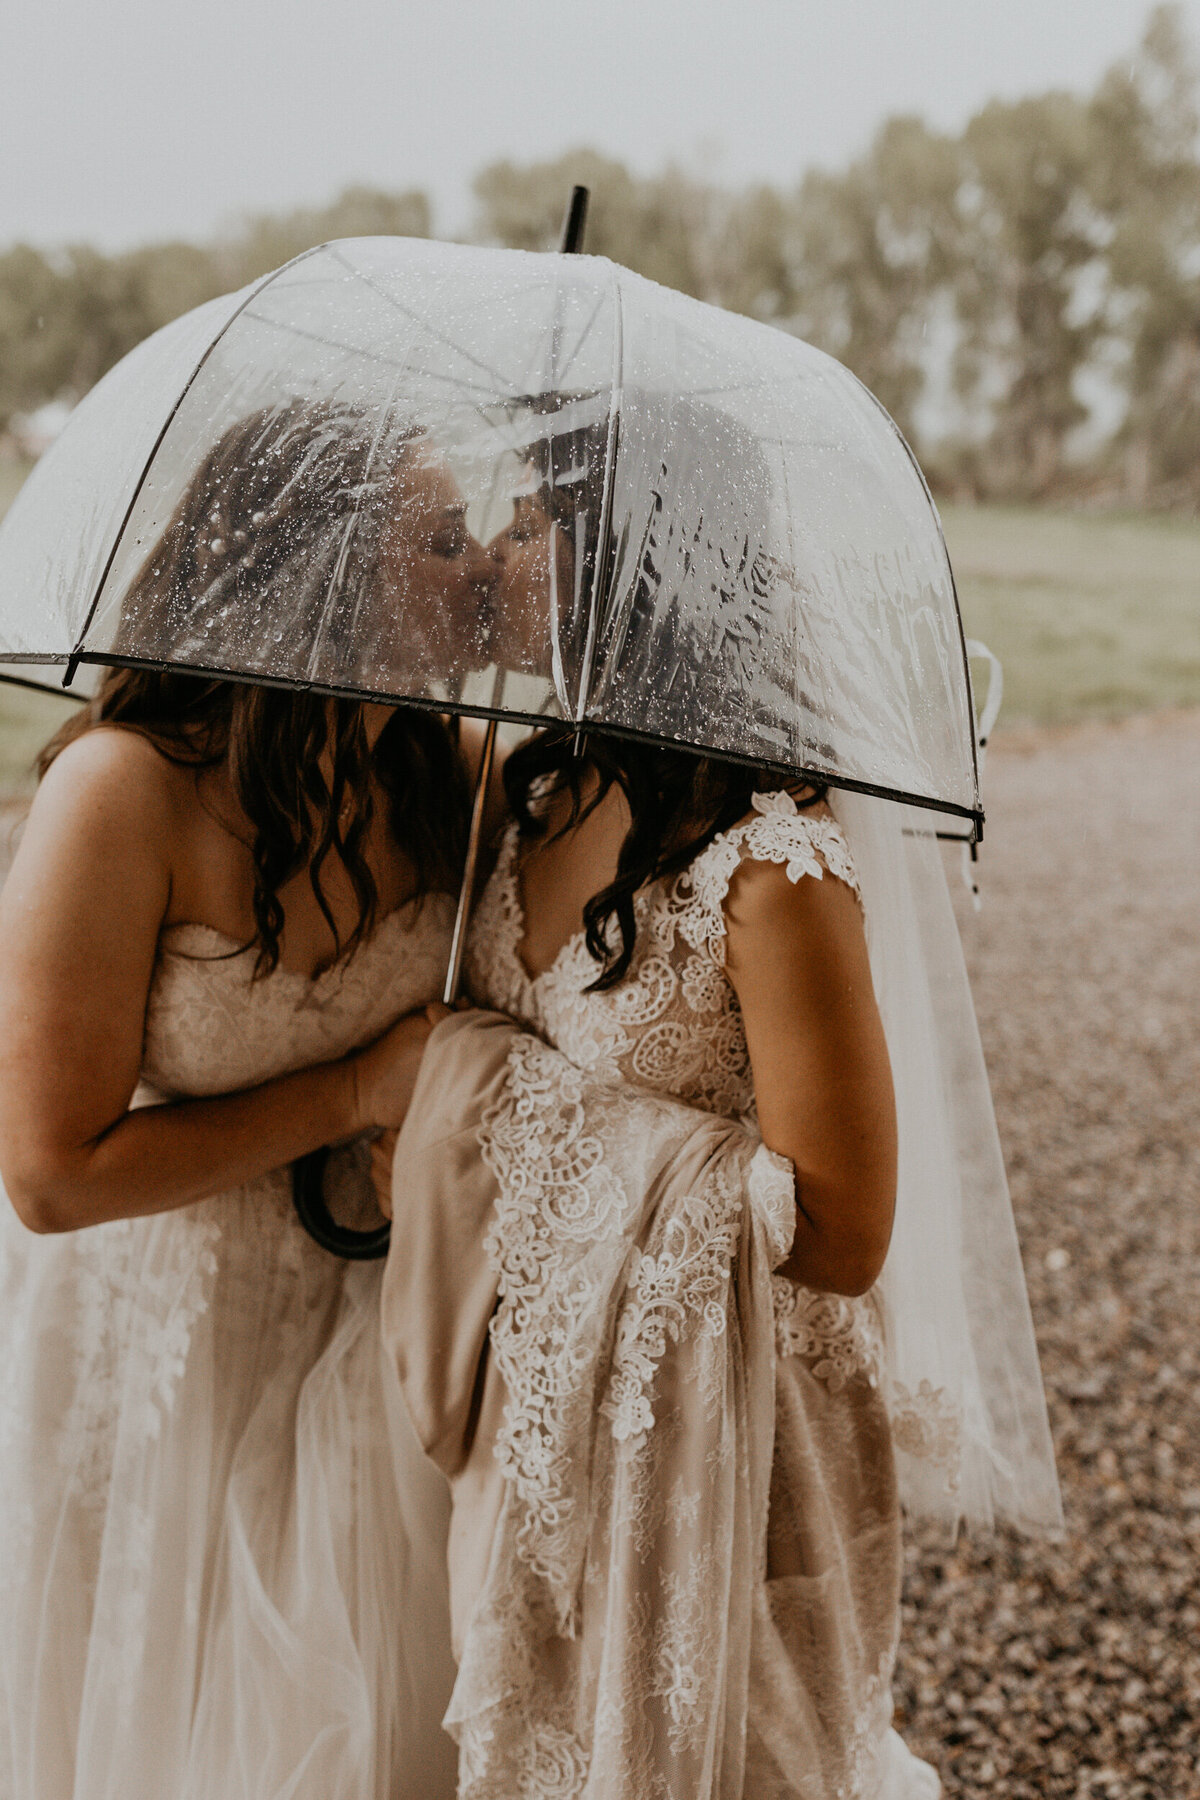 two brides under an umbrella together in the rain kissing